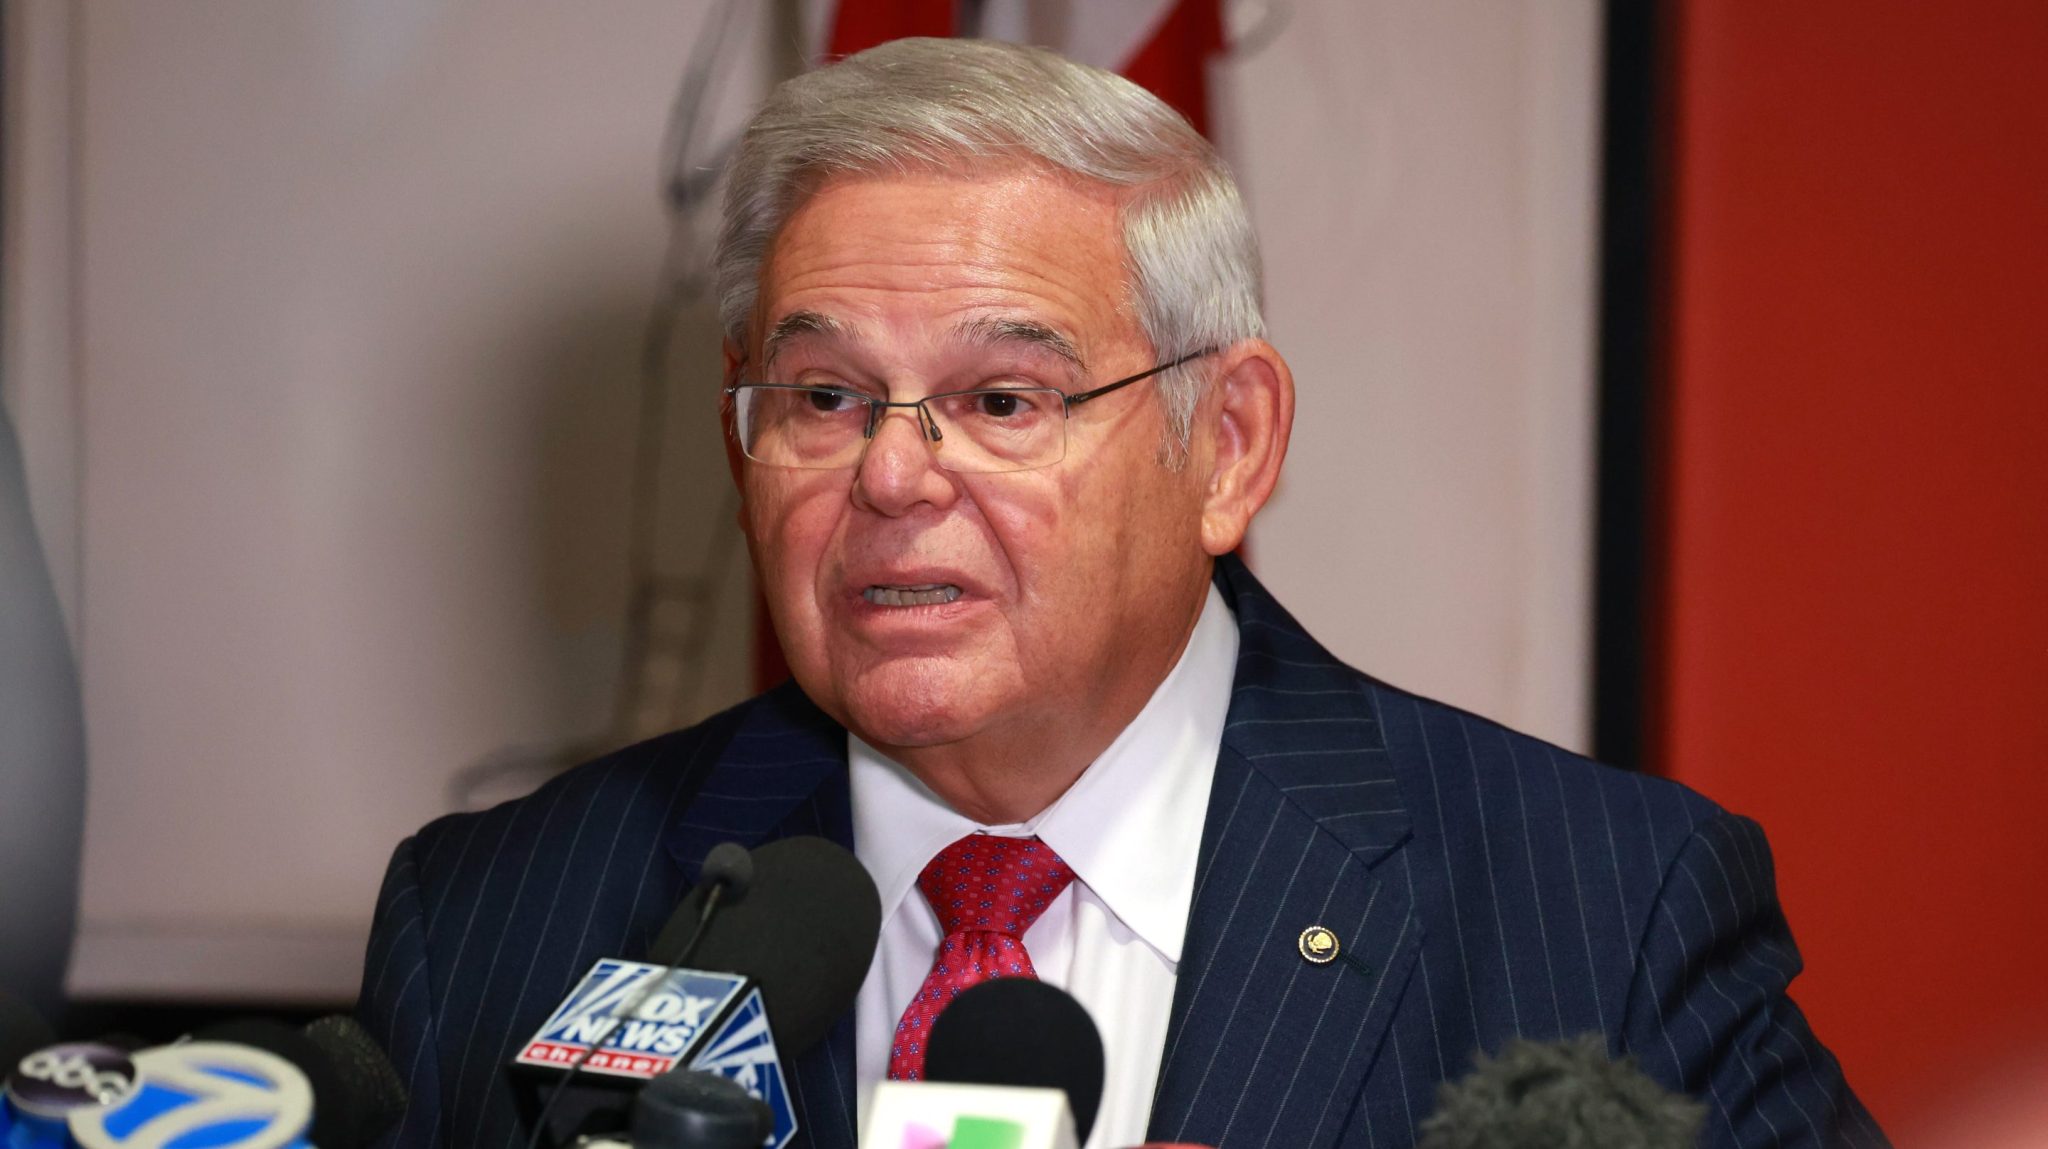 Democrats have started pressuring Sen. Menendez to resign after ‘shocking’ bribery allegations involving gold, luxury cars, and cash